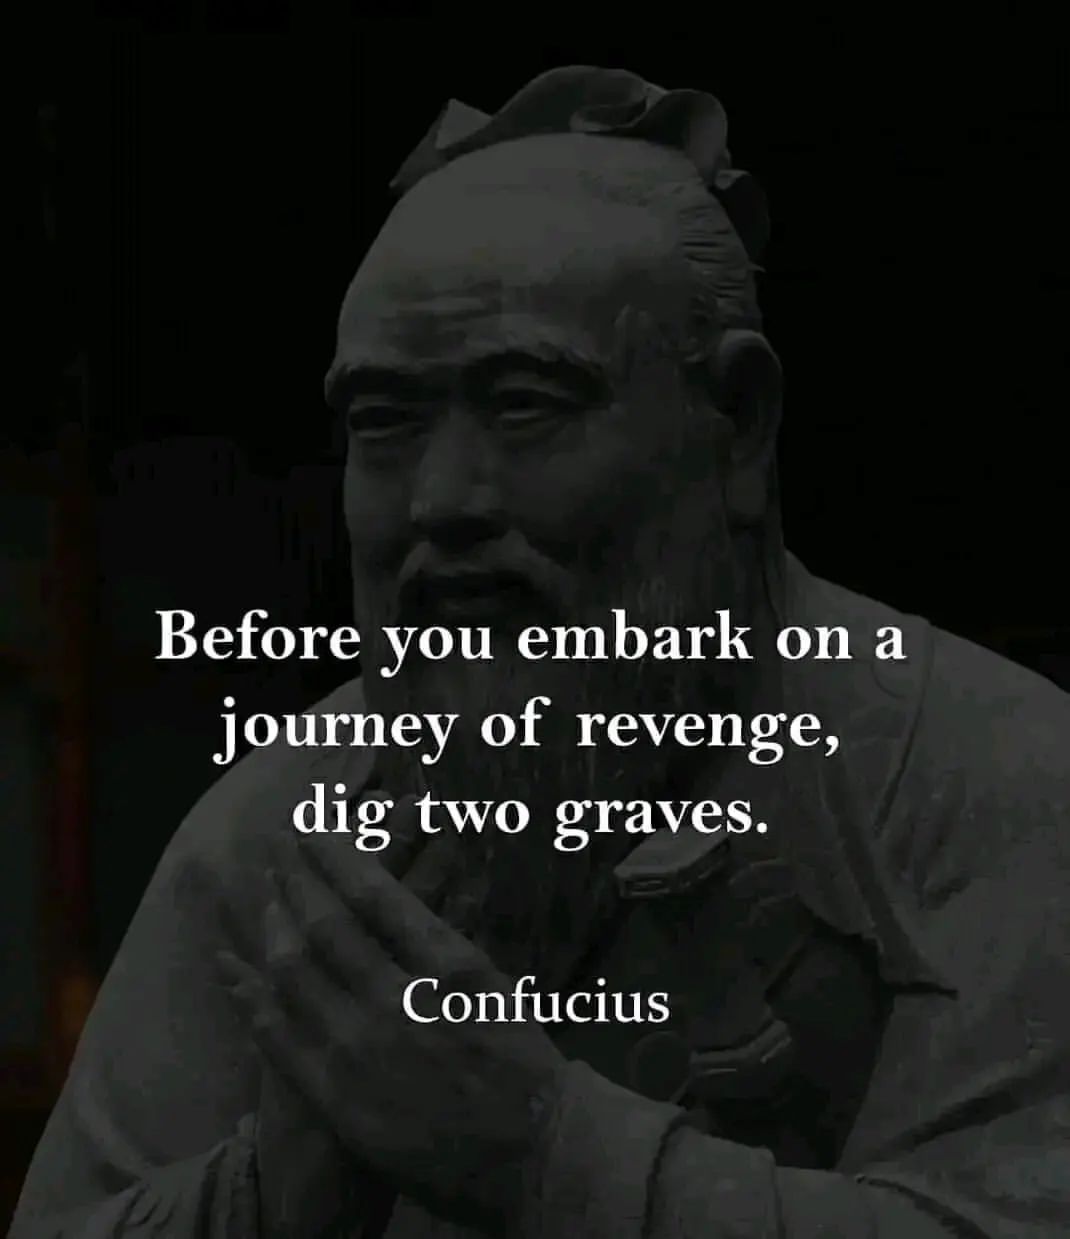 Before you embark on a journey of revenge, dig two graves. Confucius.